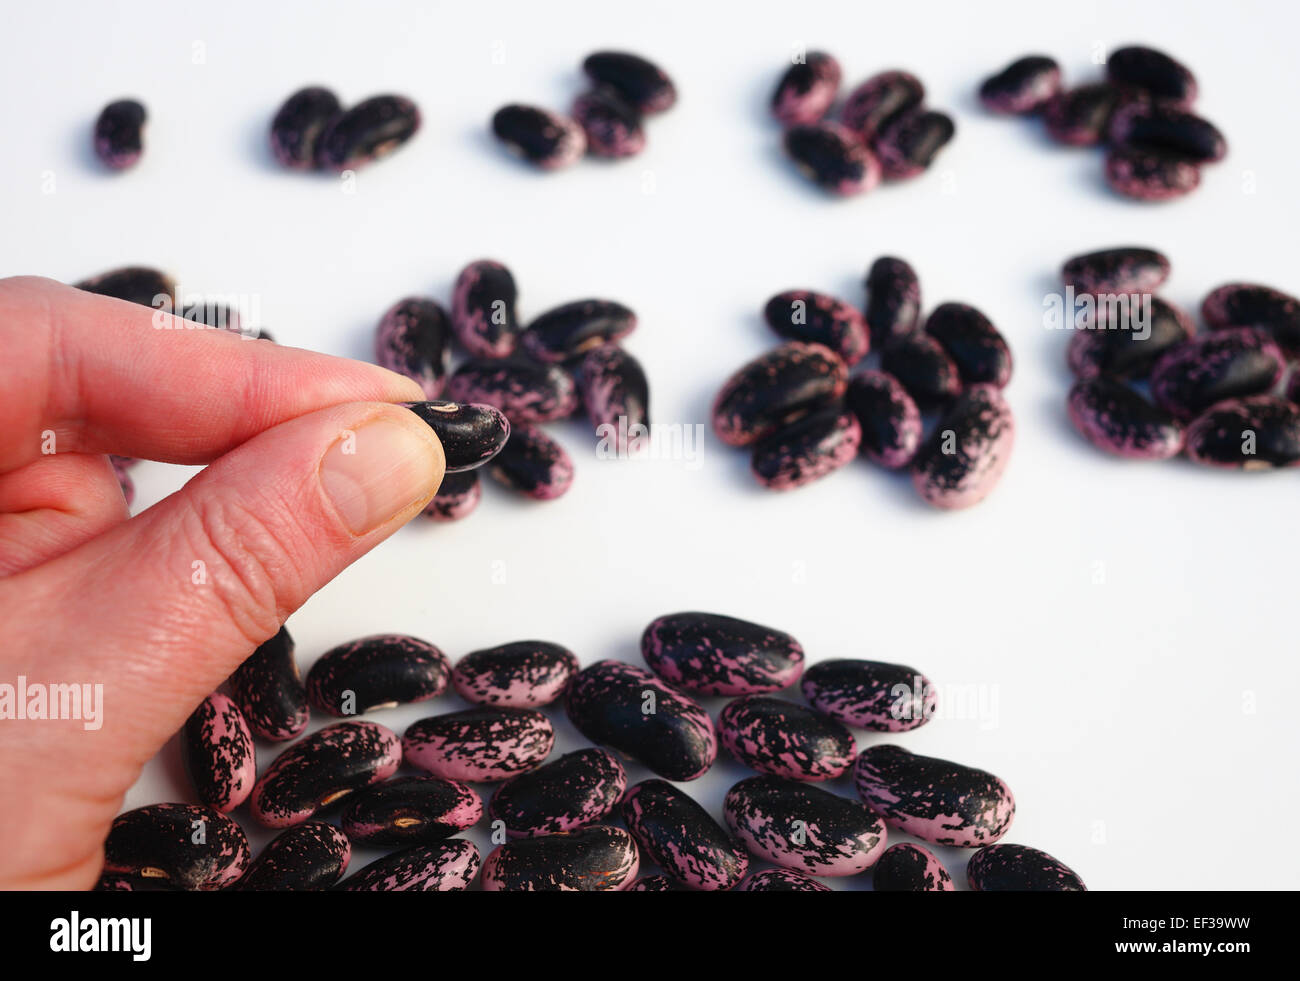 Man counting out beans. Stock Photo